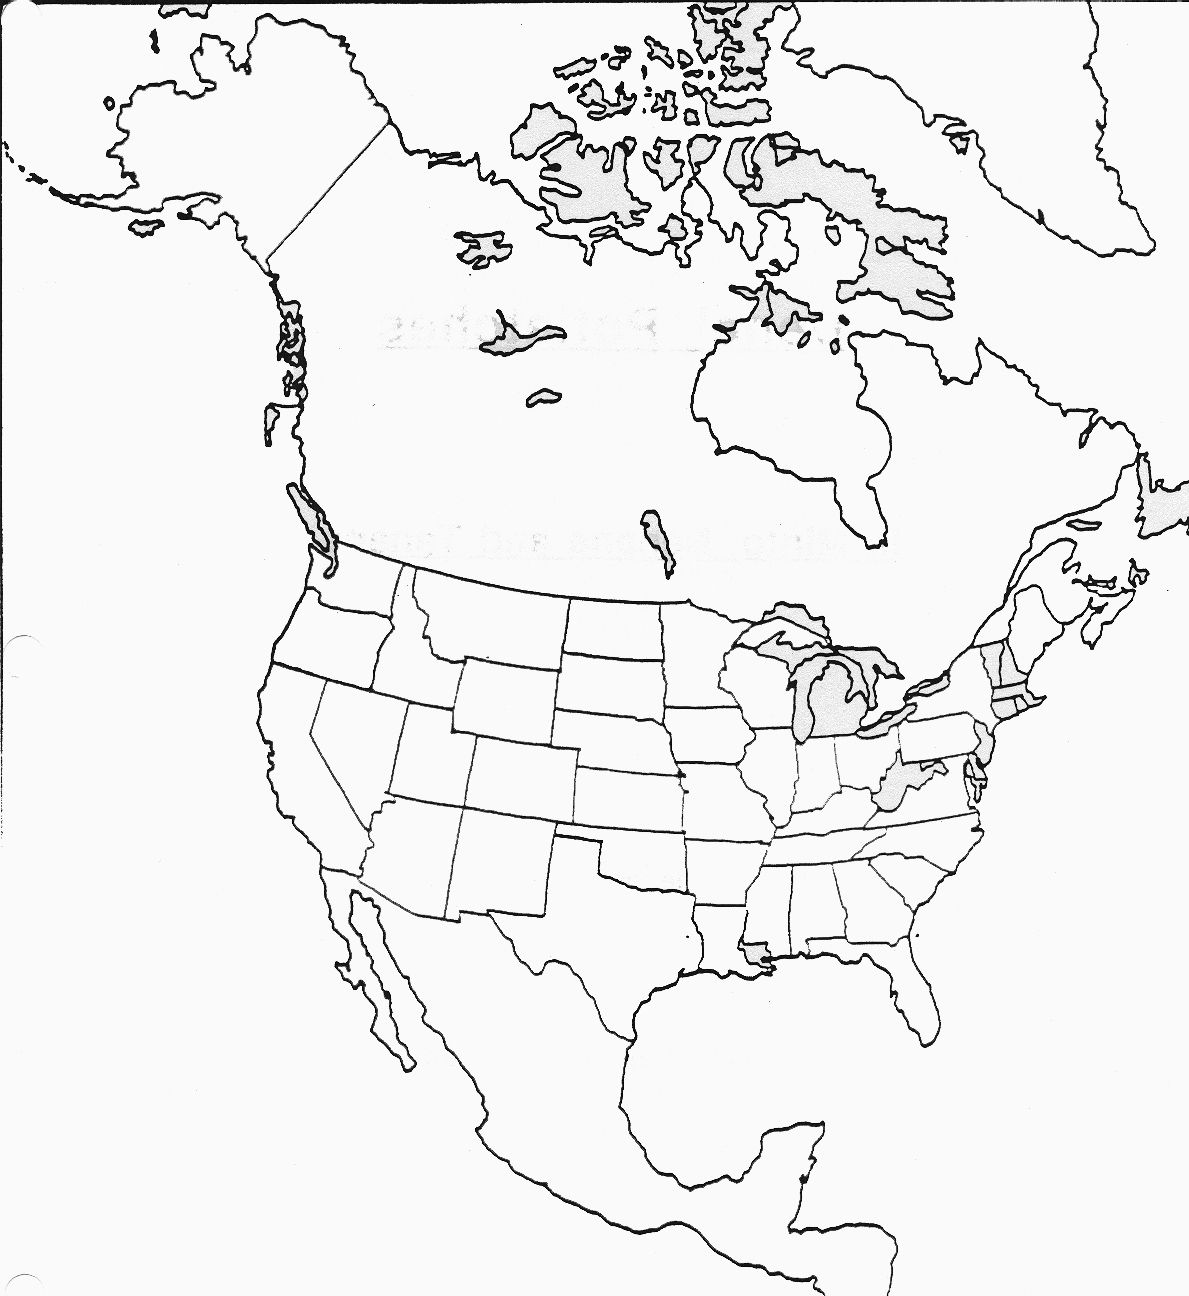 North America Map Coloring Page High Quality Coloring